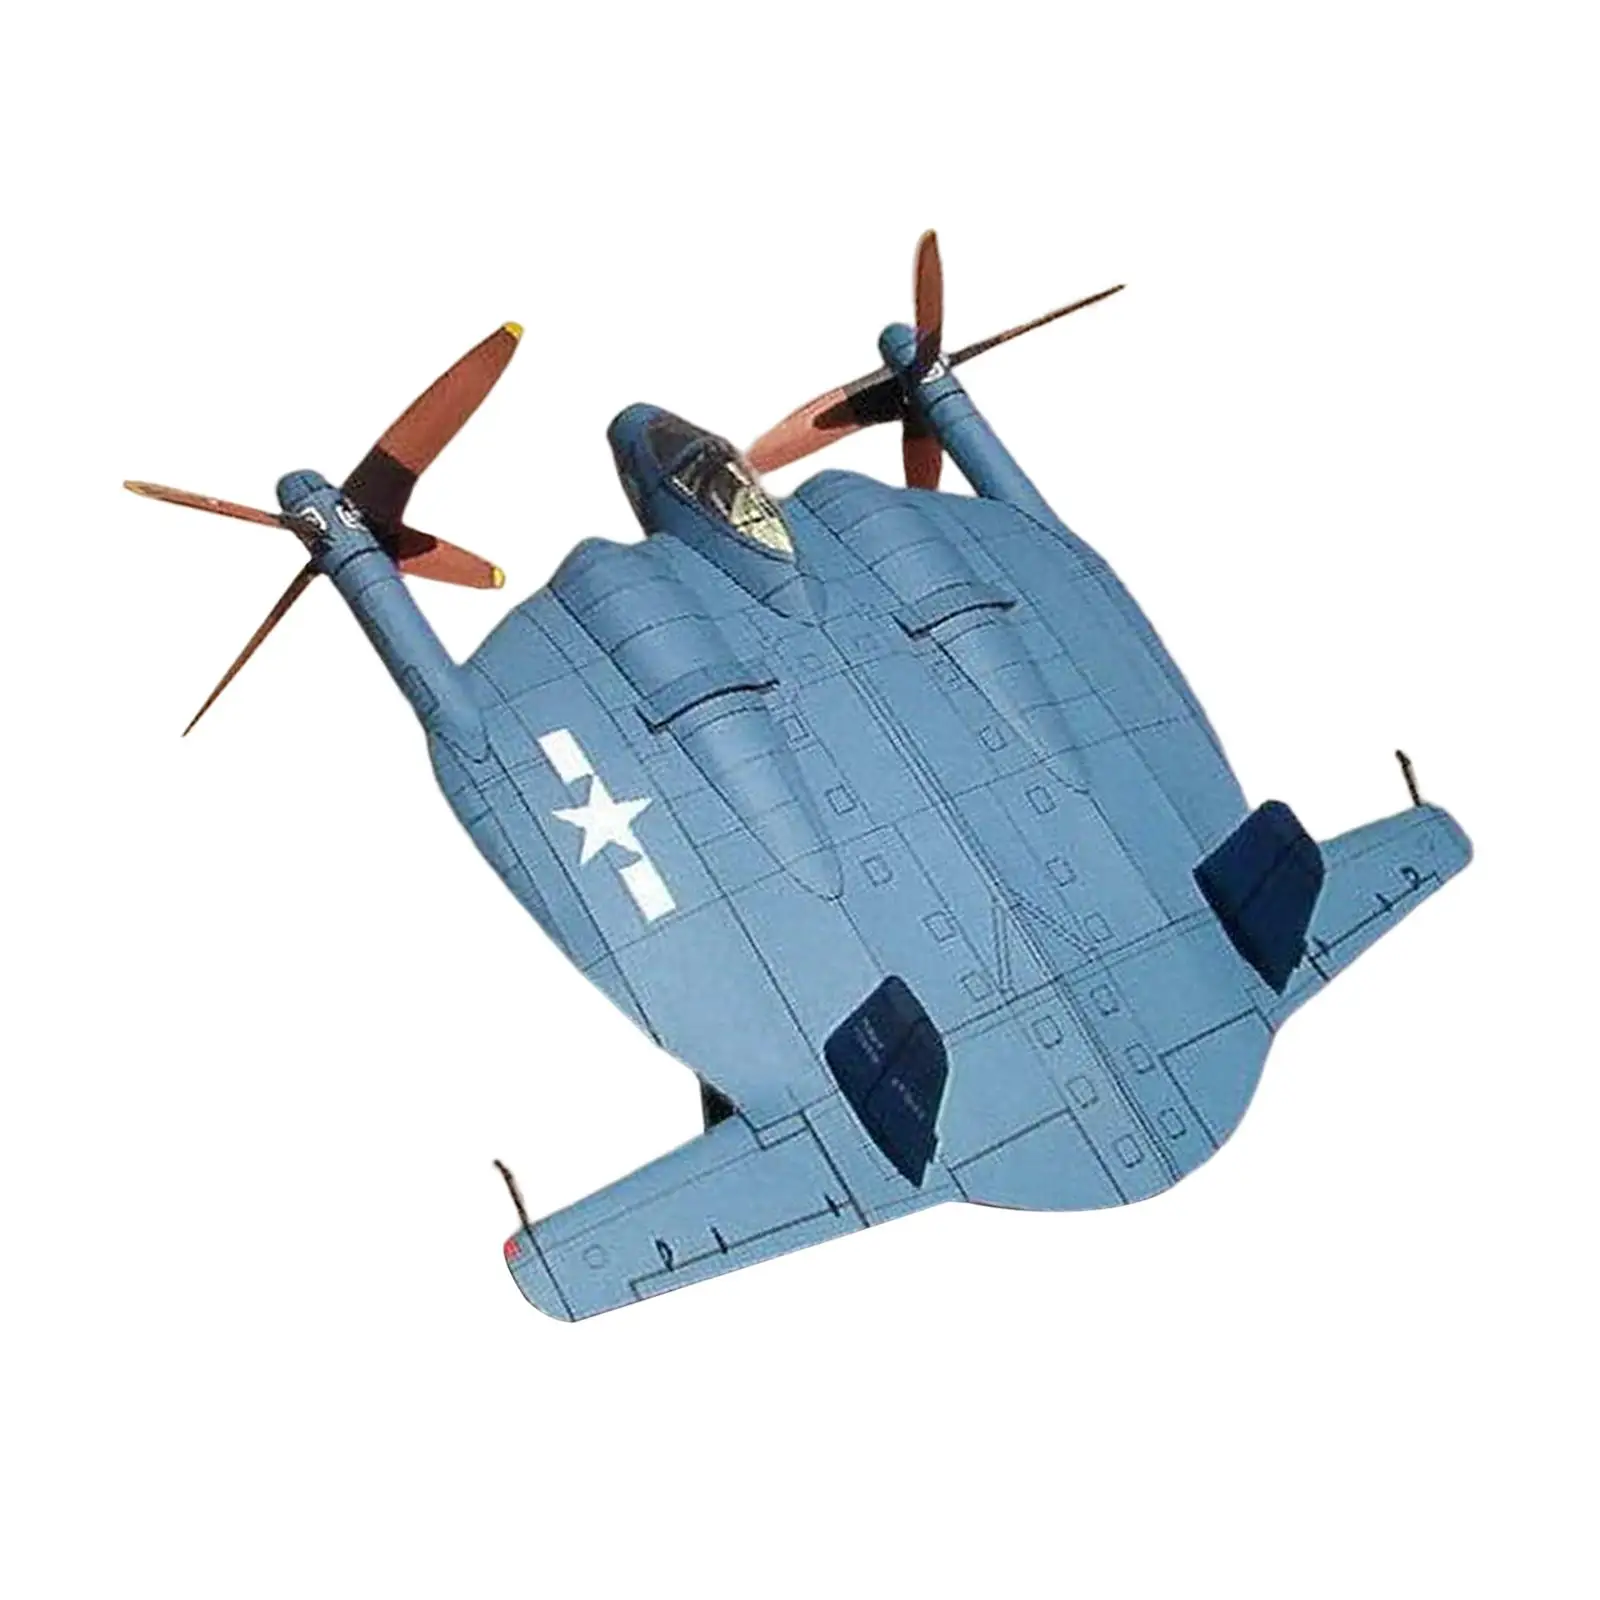 Air Aviation aircraft Paper Model Miniature Hobby Education Toys Fighter Model Toy for Decor Teens Souvenir